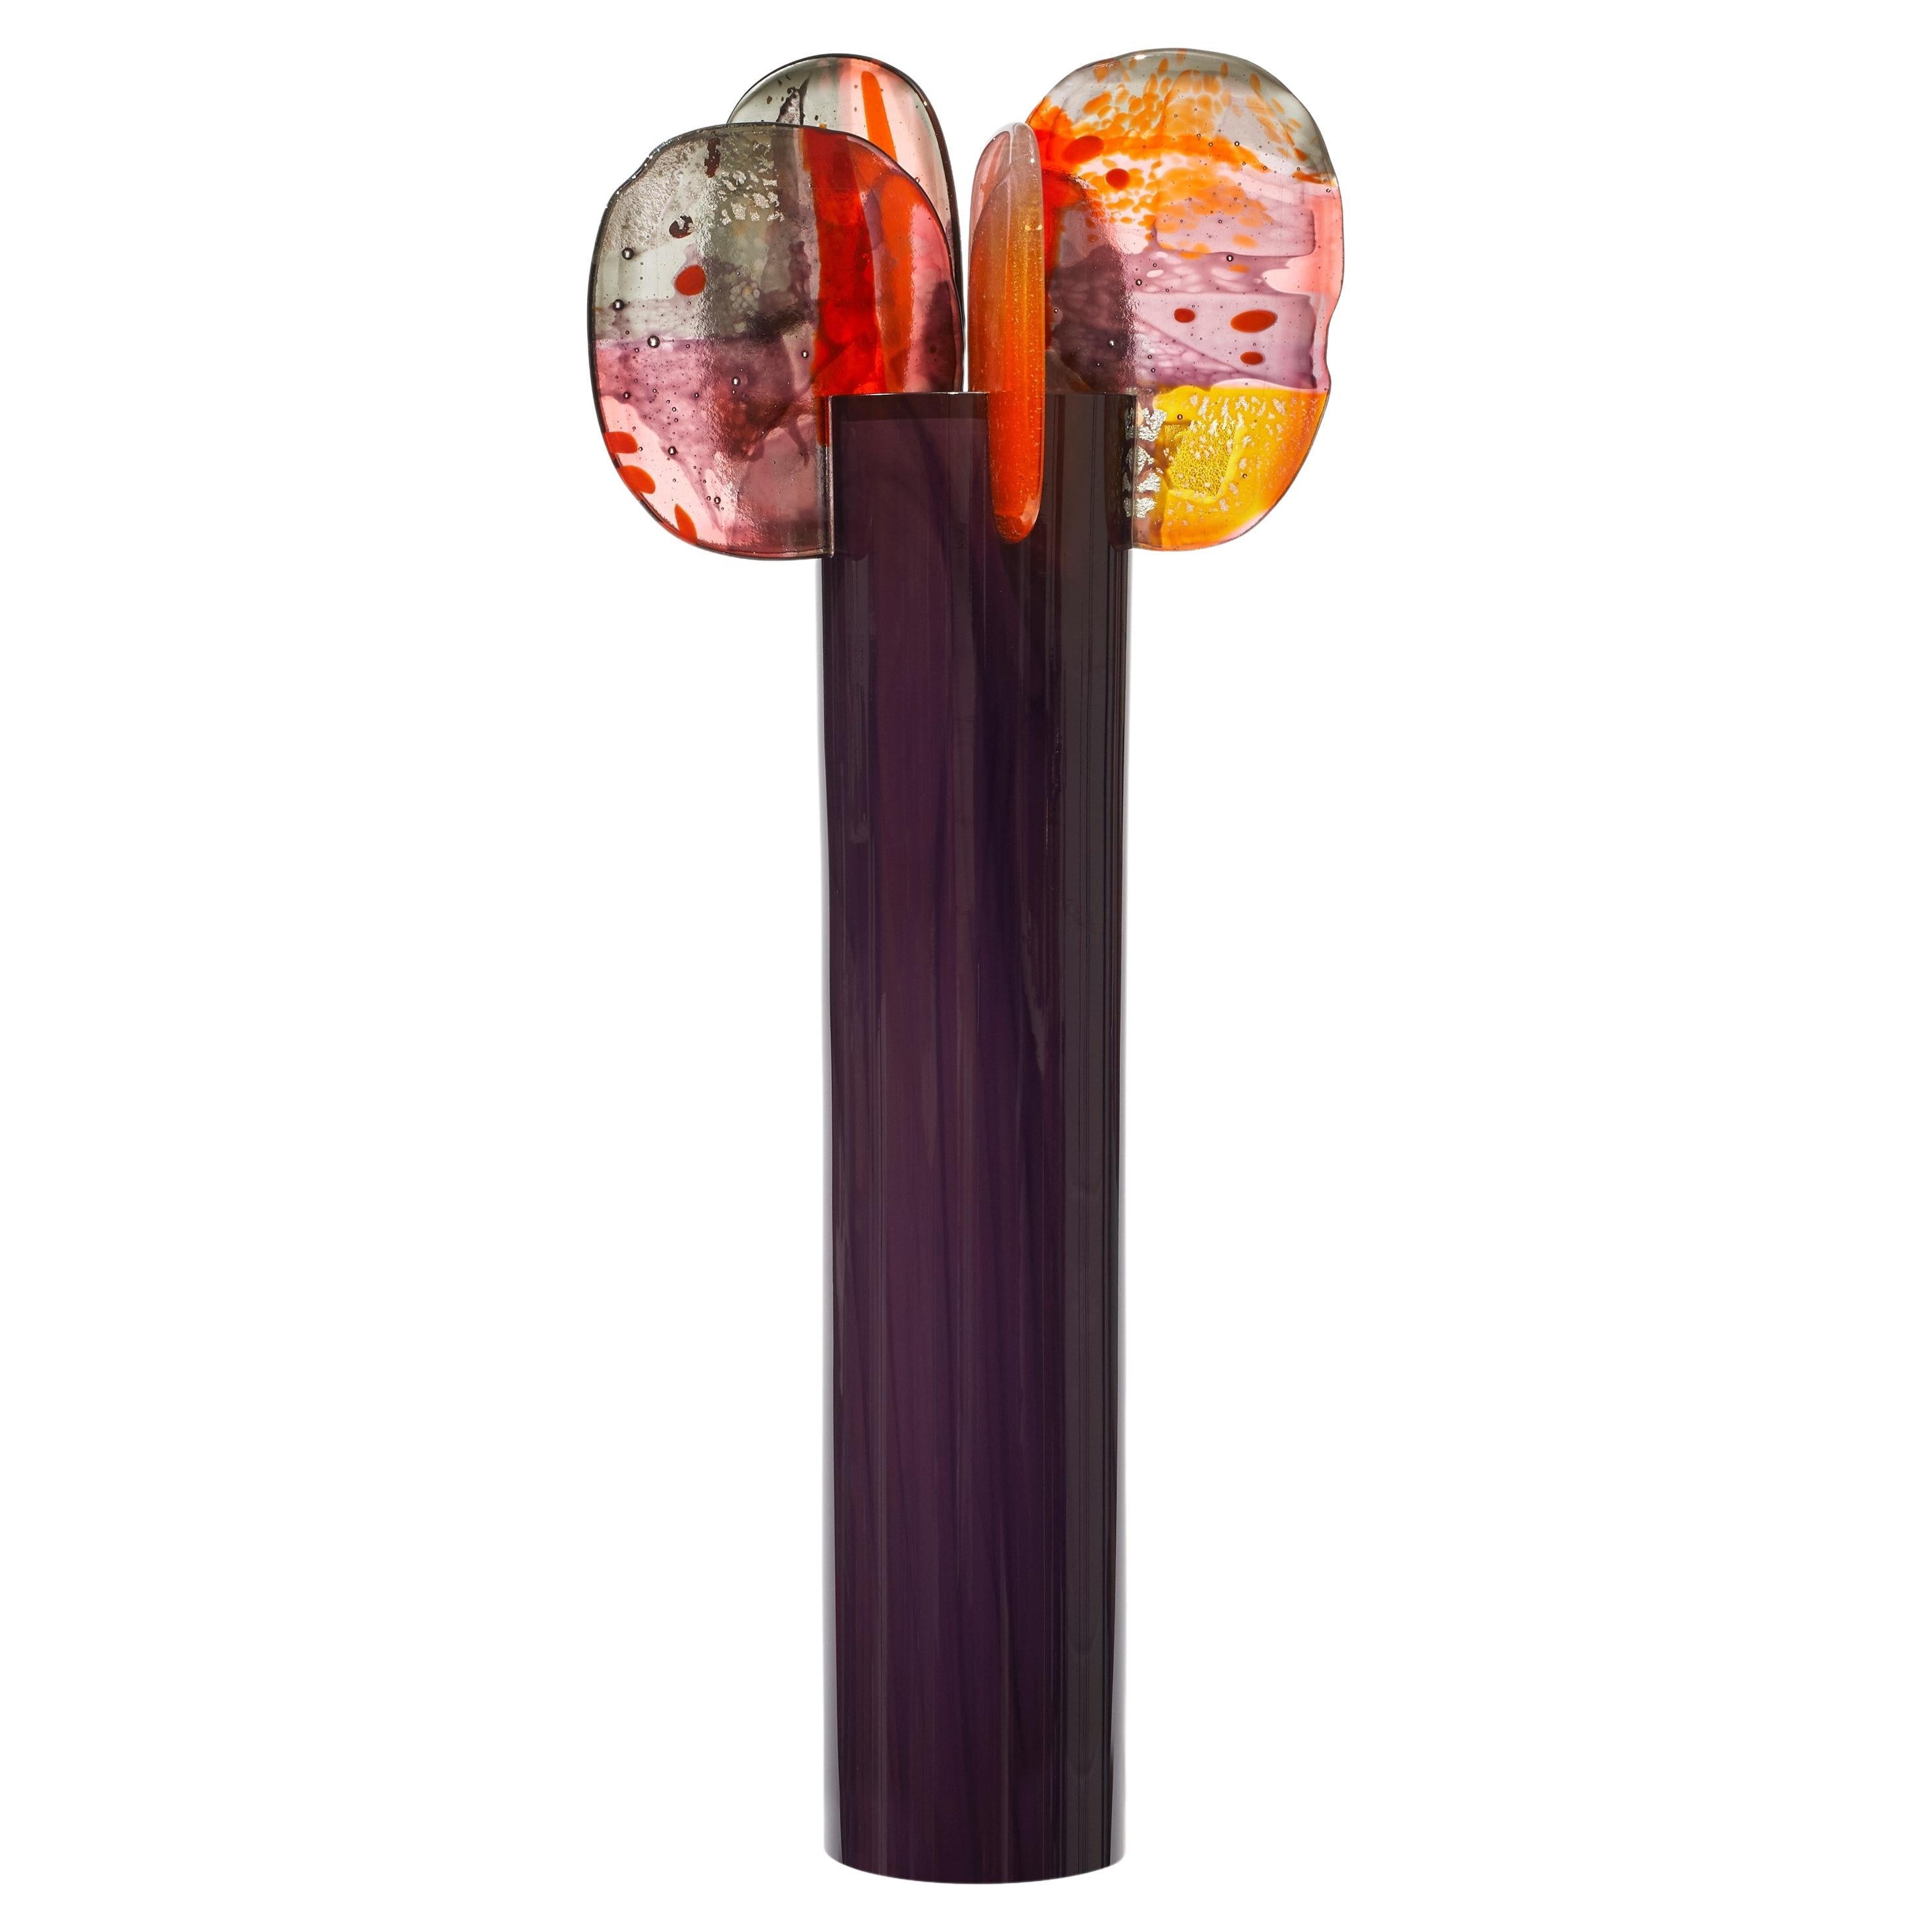 Paradise 02 in Stapelia, purple, grey, red & gold glass sculpture by Amy Cushing